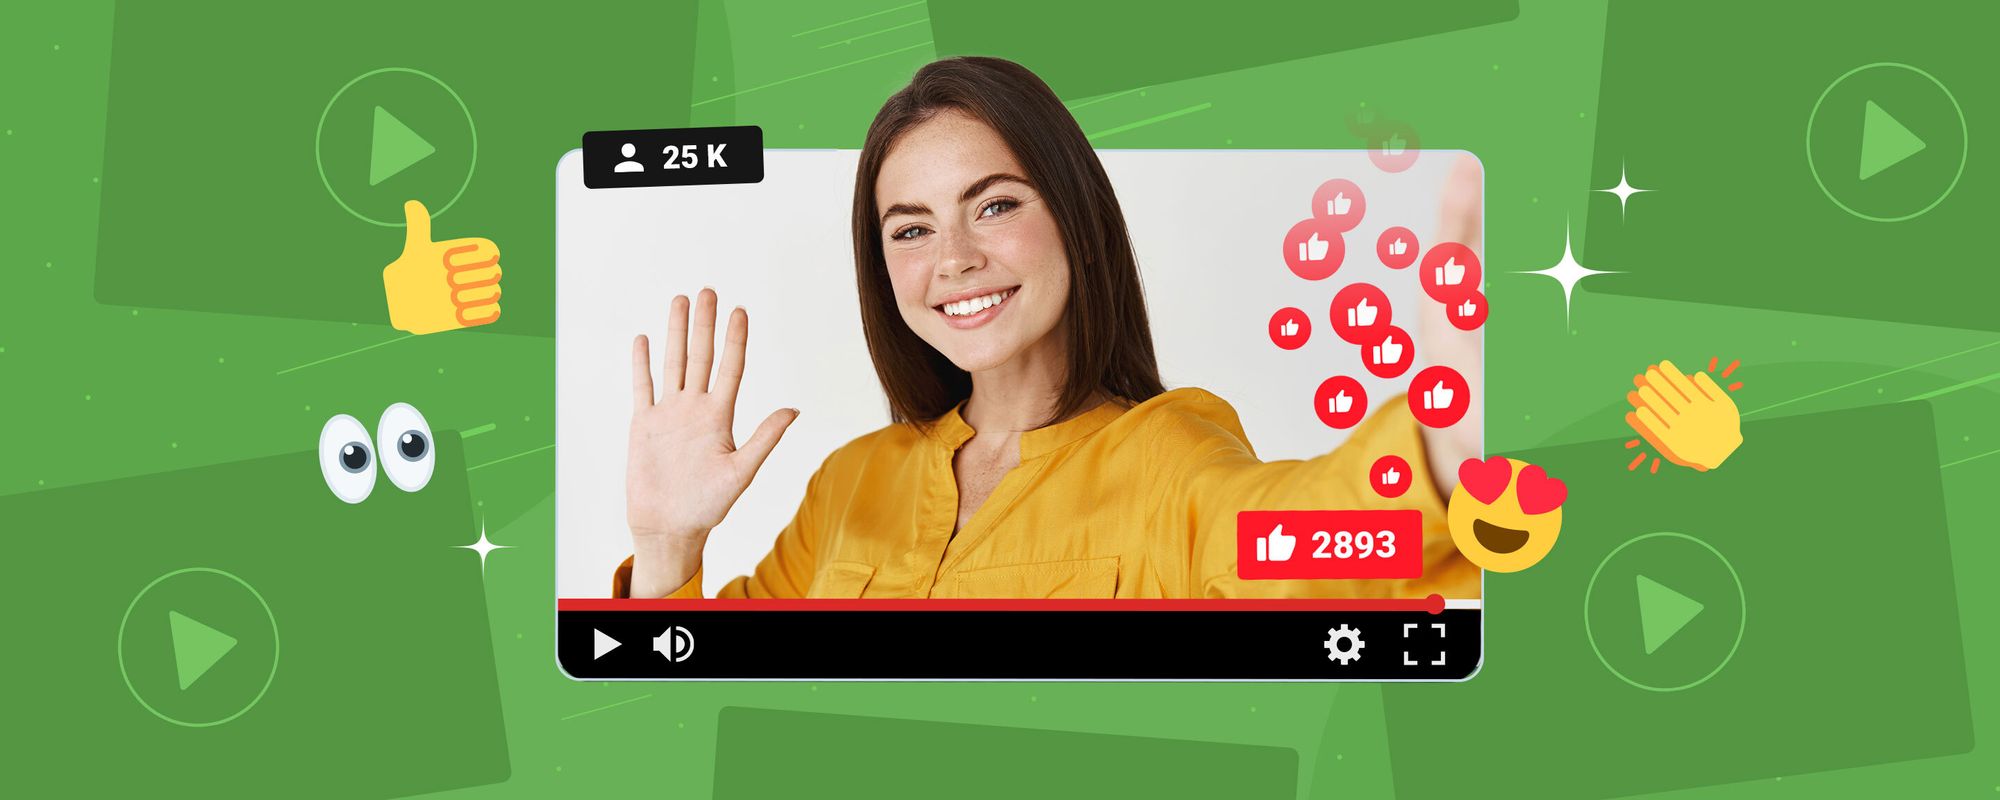 Image of a YouTuber looking happy on a video having with the watch time bar at the bottom showing a long view duration.